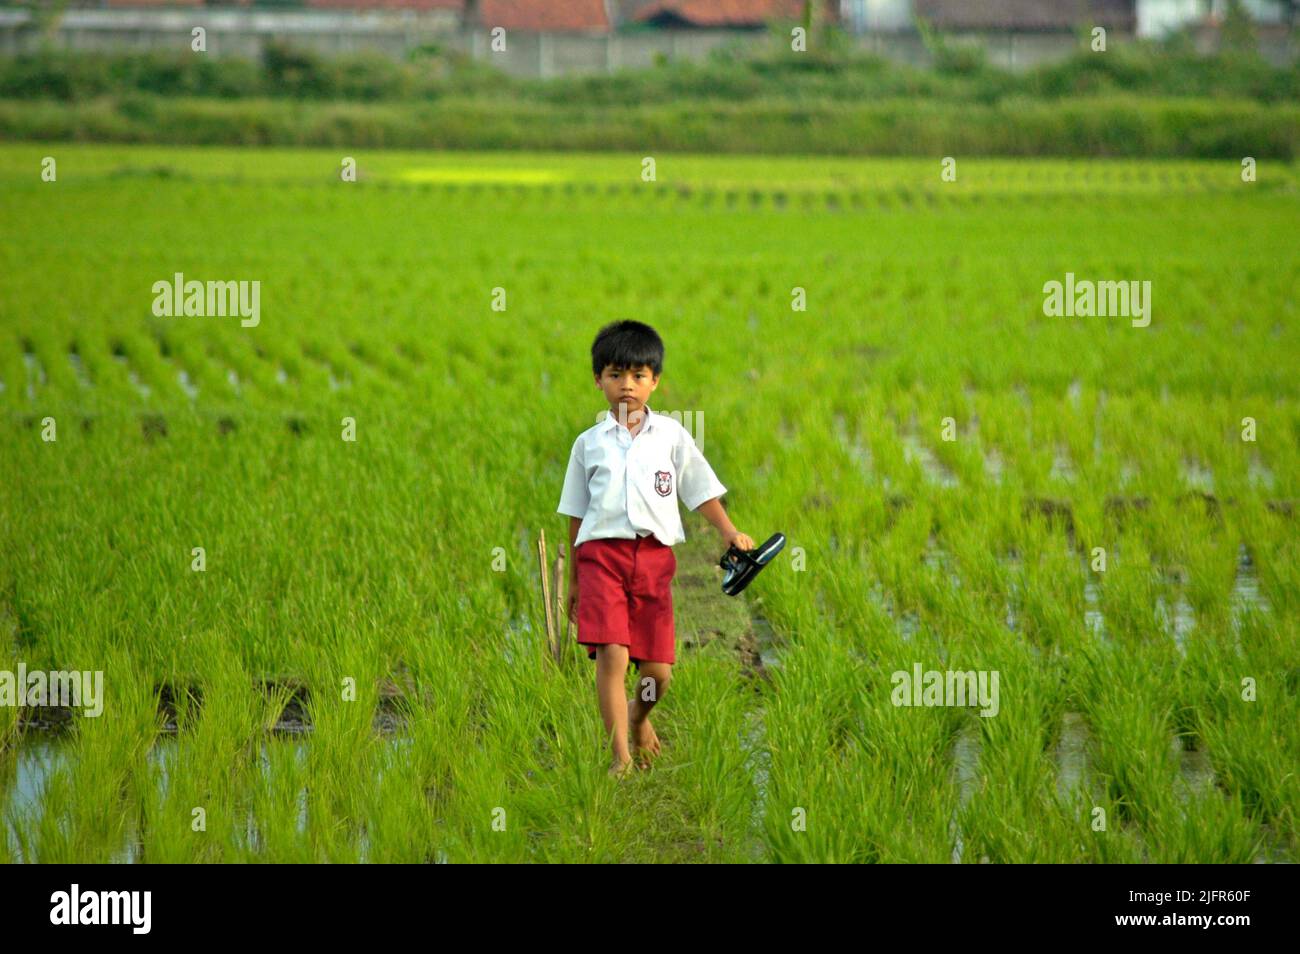 A child wearing elementary school uniform is carrying his sandals as he is walking on an embankment in the middle of a rice field in Gede Bage, Bandung, West Java, Indonesia. Stock Photo